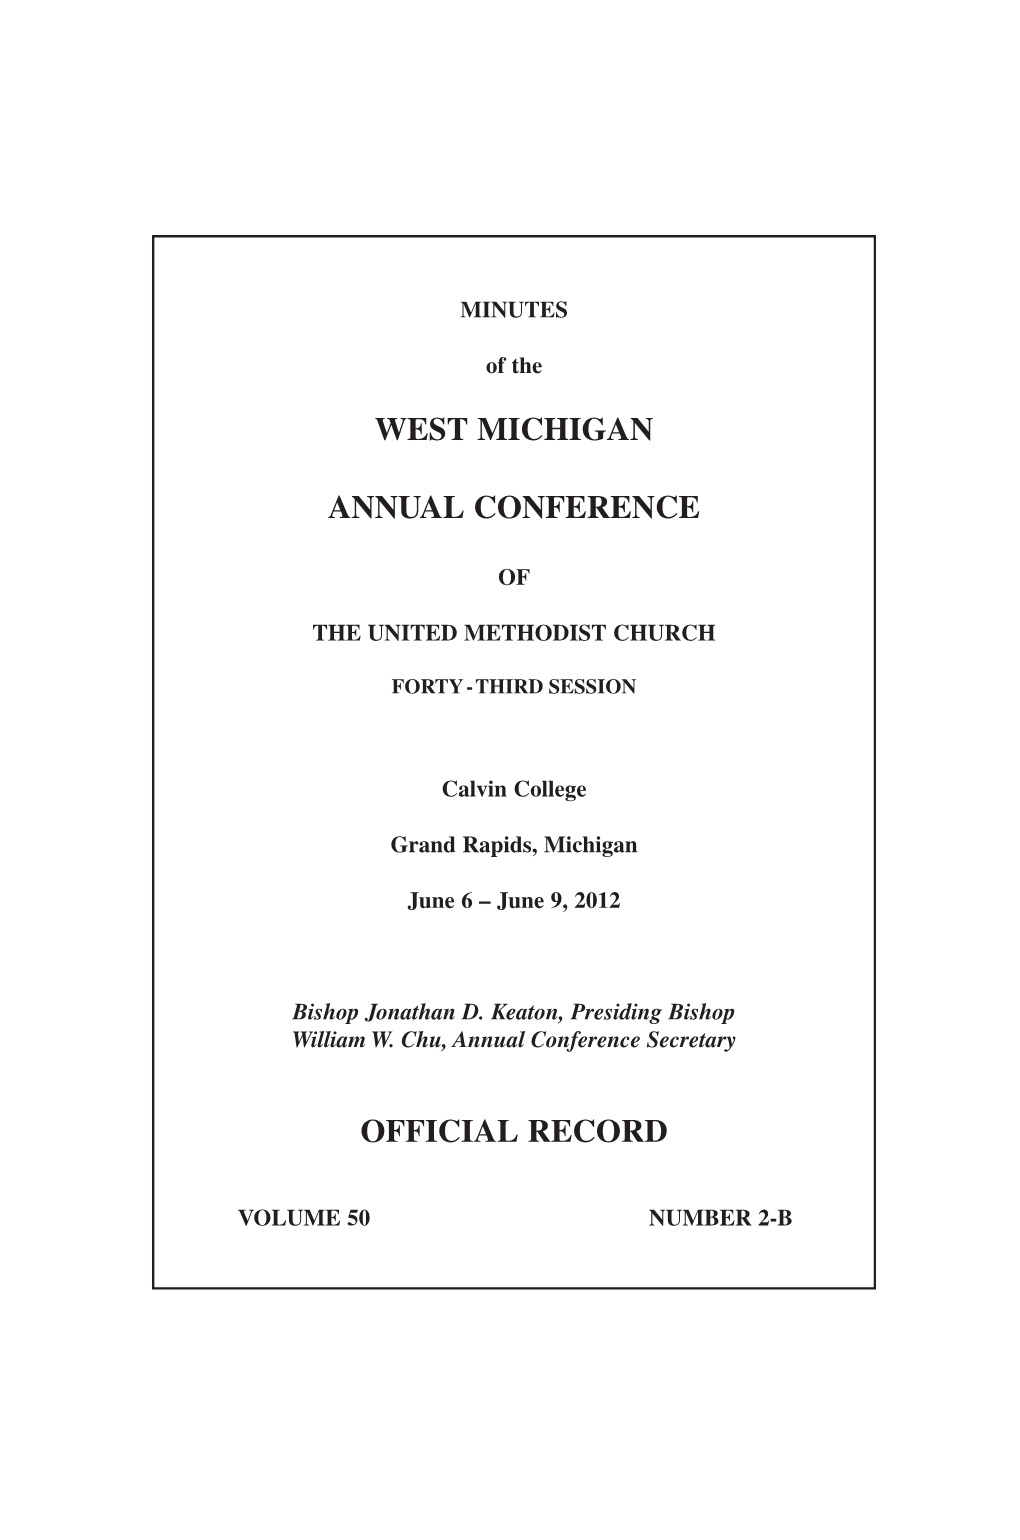 West Michigan Annual Conference Official Record